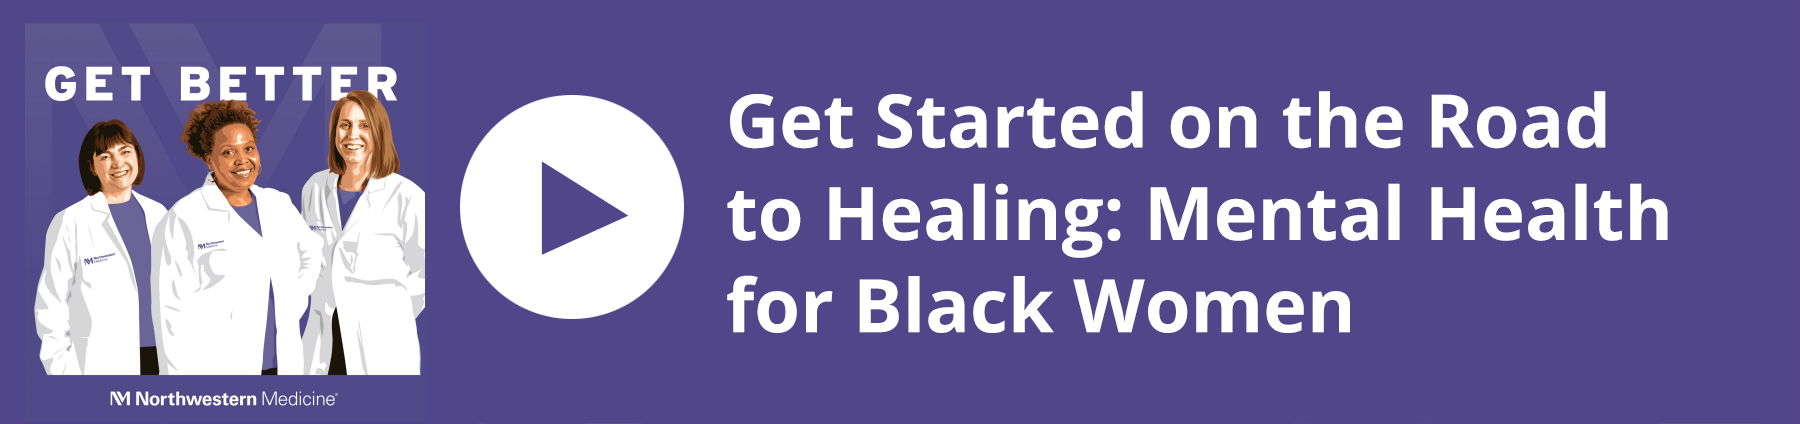 Get Better - Get Started on the Road to Healing: Mental Health for Black Women